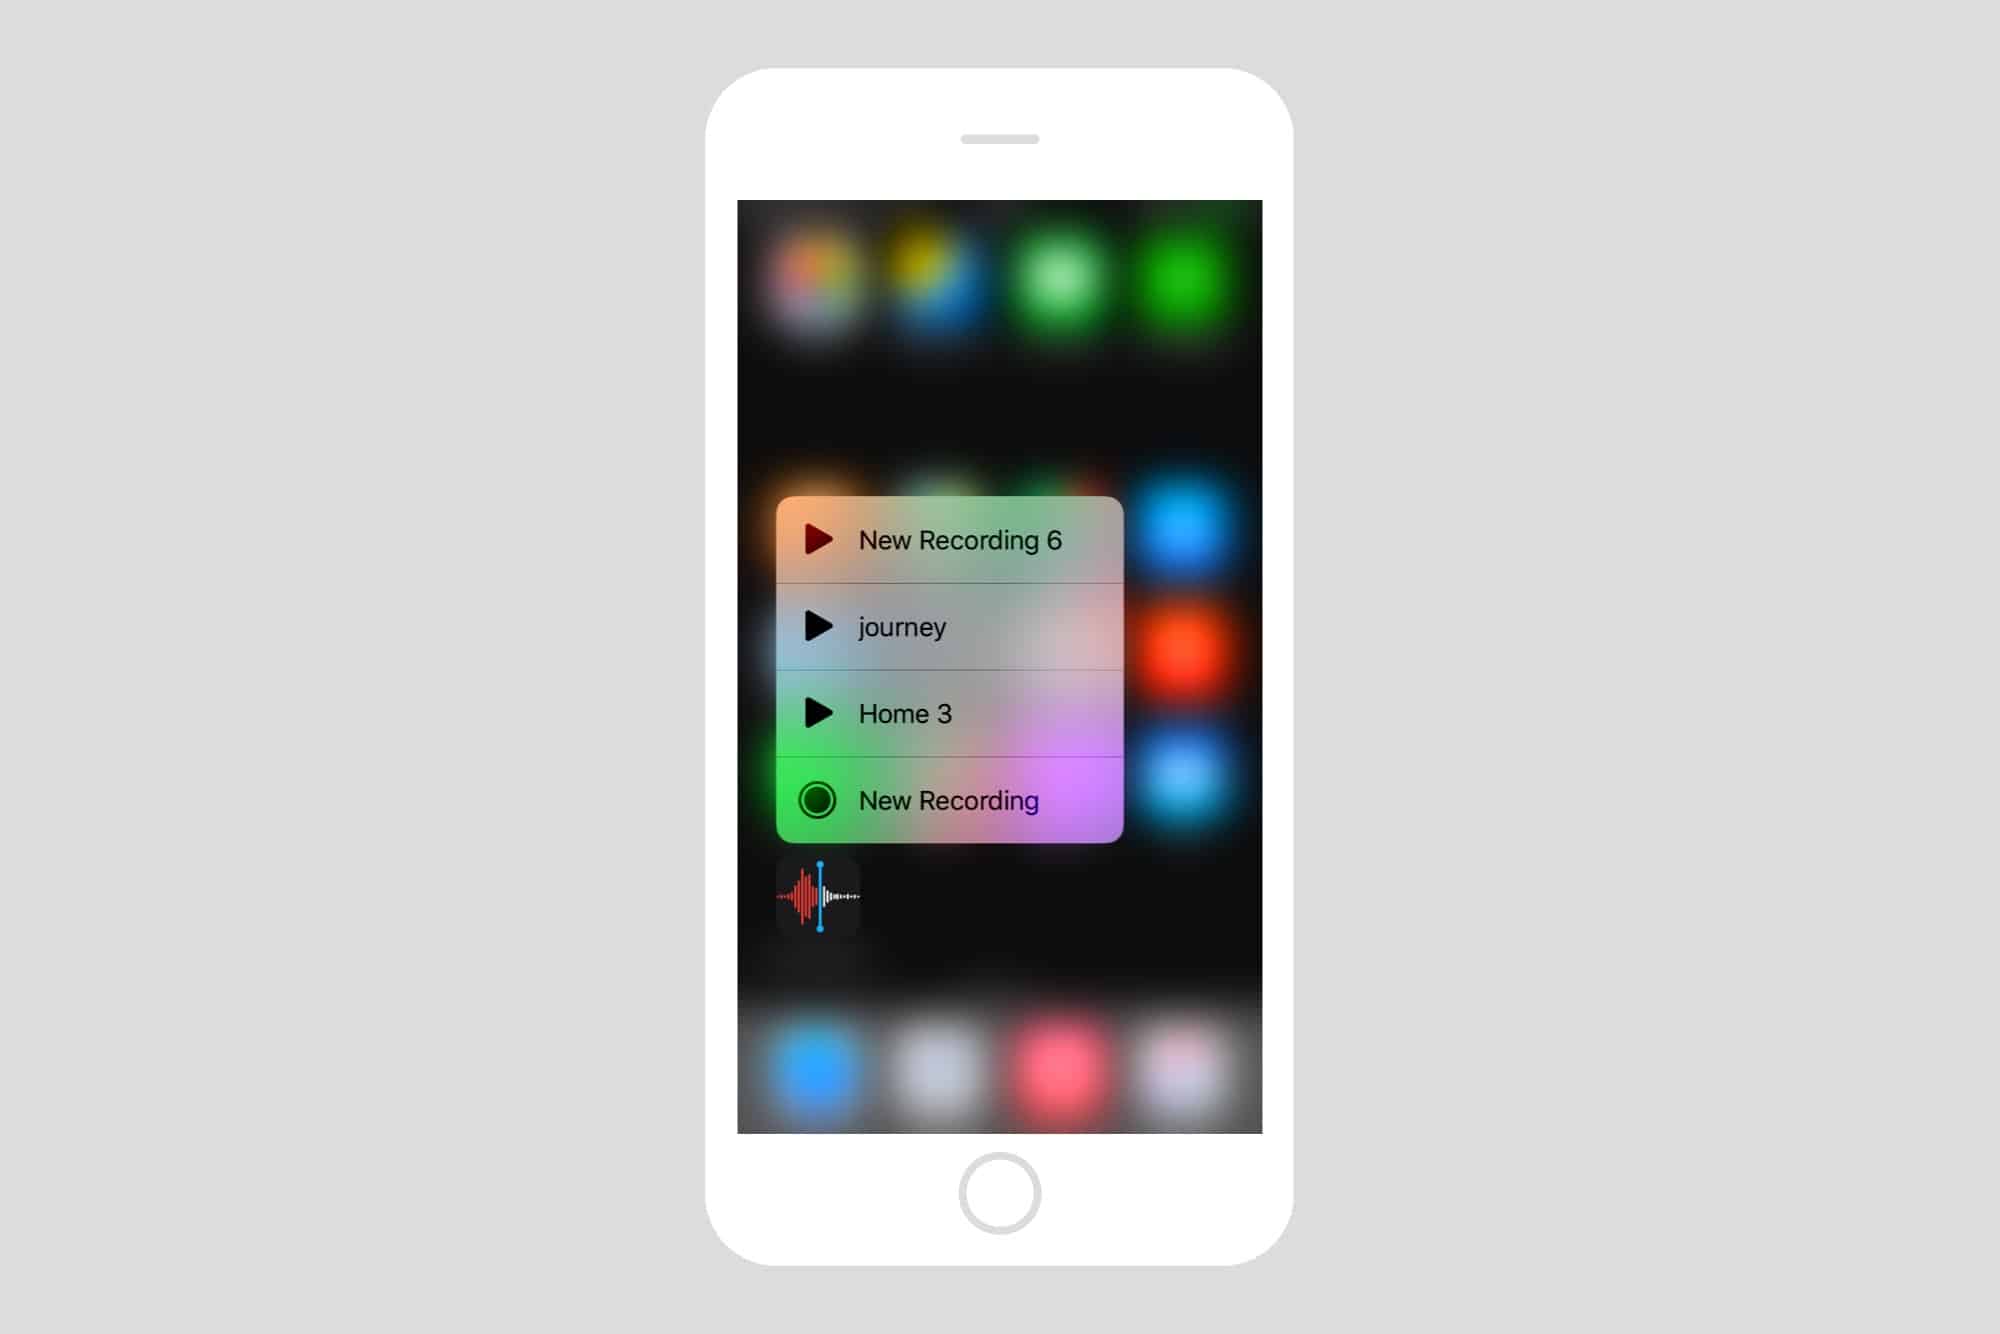 The 3D Touch widget for Voice Memos in iOS 12.